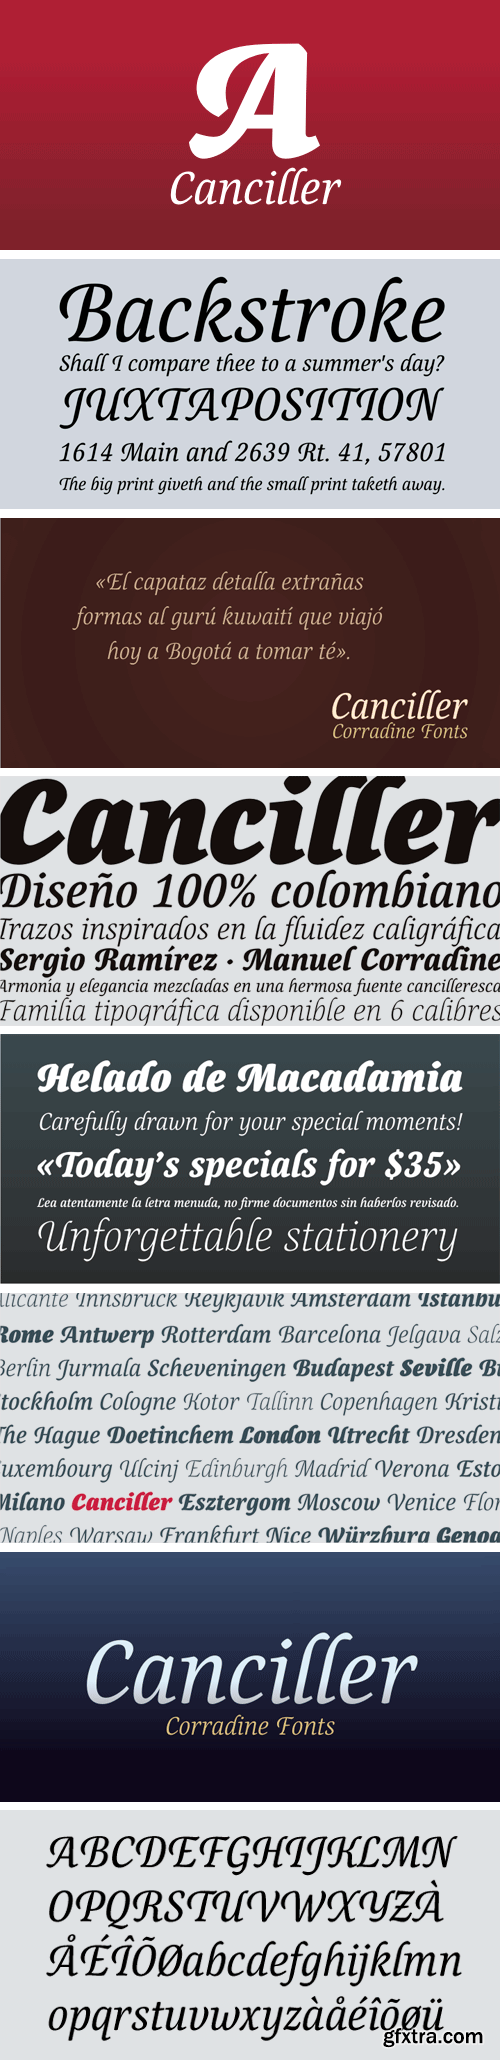 Canciller Font Family - 6 Fonts for $80